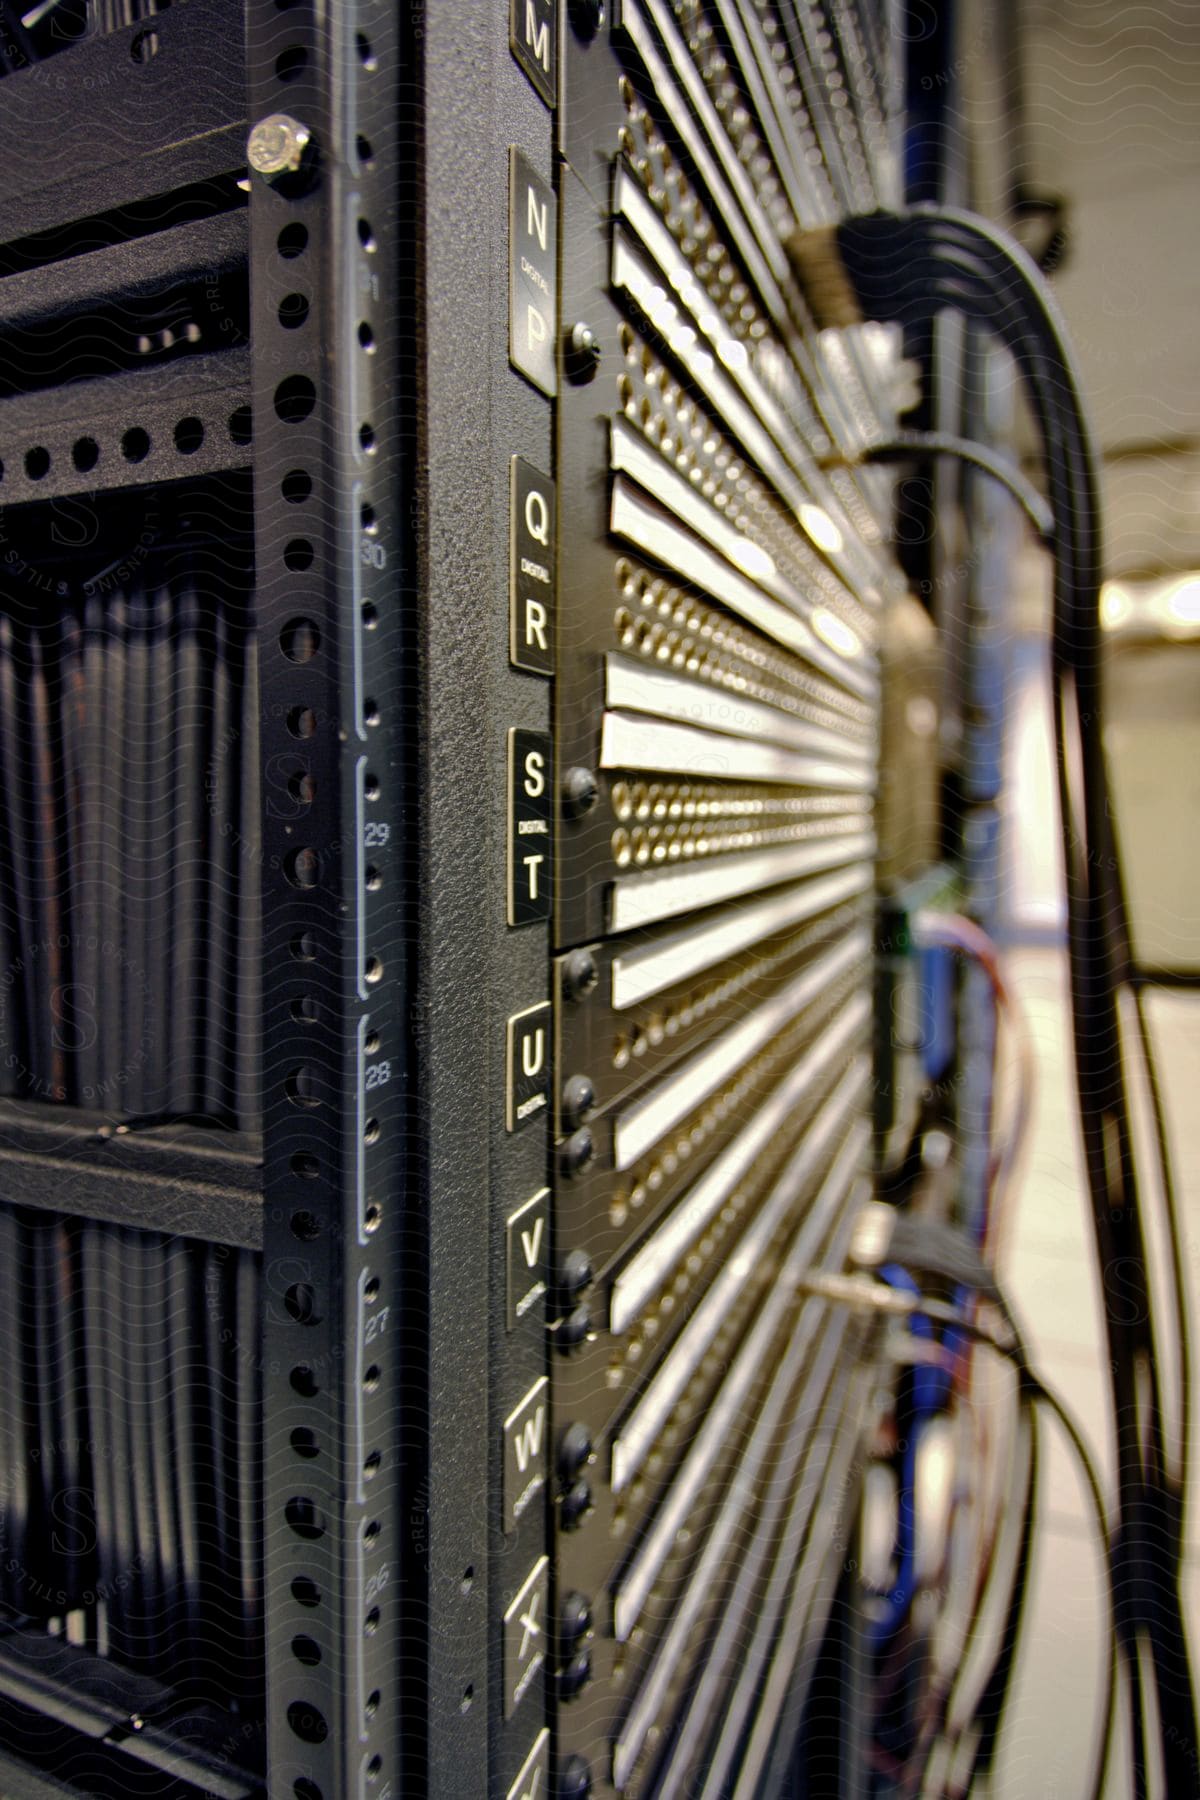 A server in a companys server room with cables and network connections